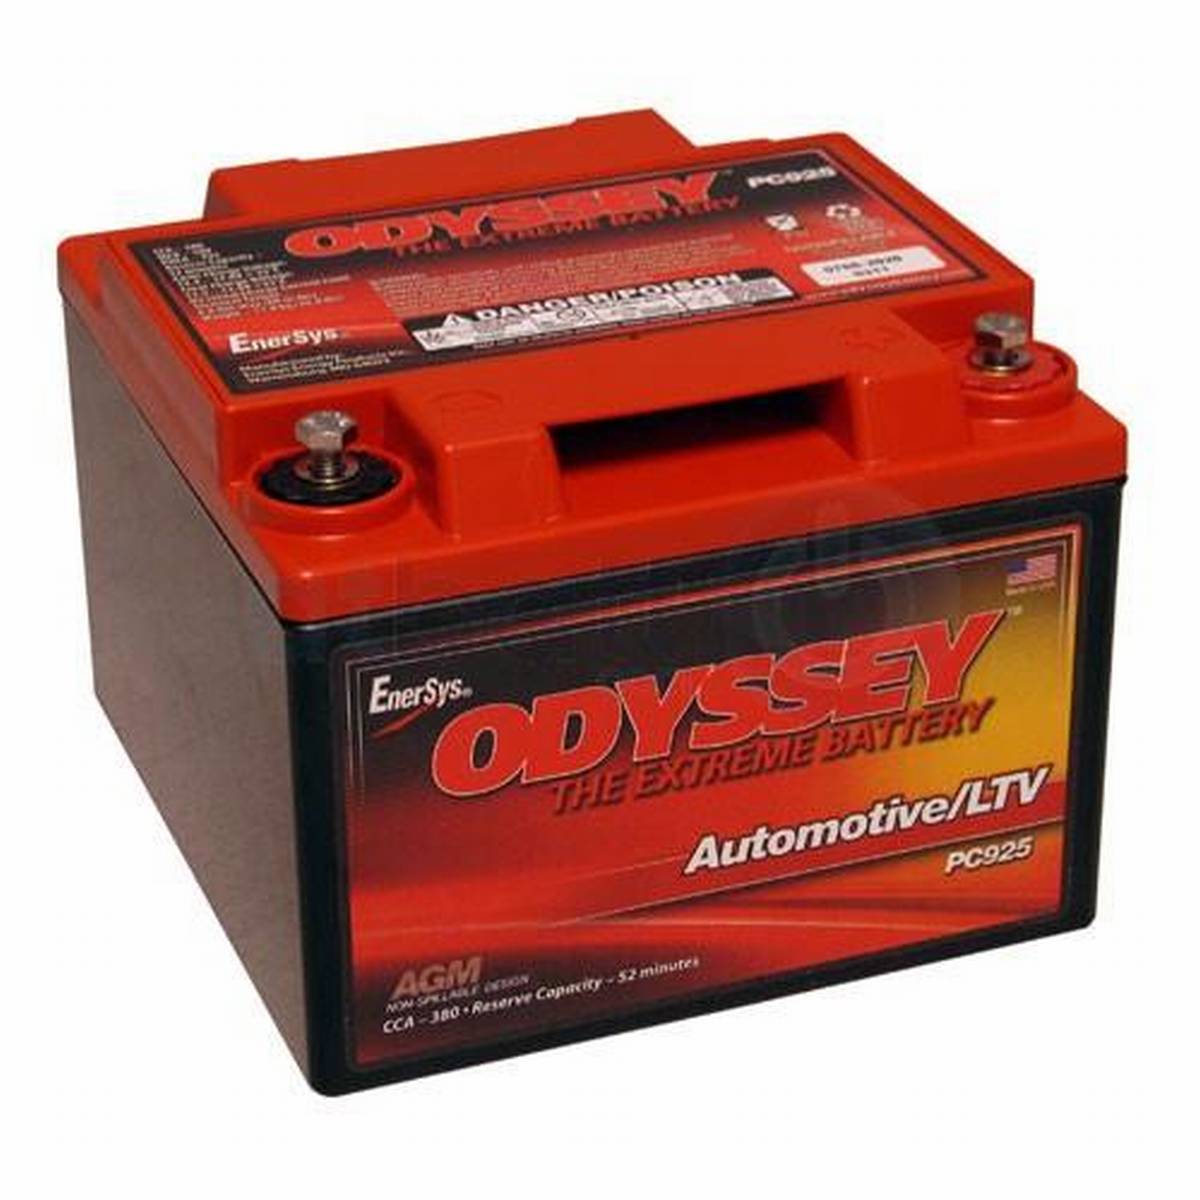 Hawker Odyssey PC925 12V 28Ah 330A AGM Motorcycle Battery Pure Lead Battery